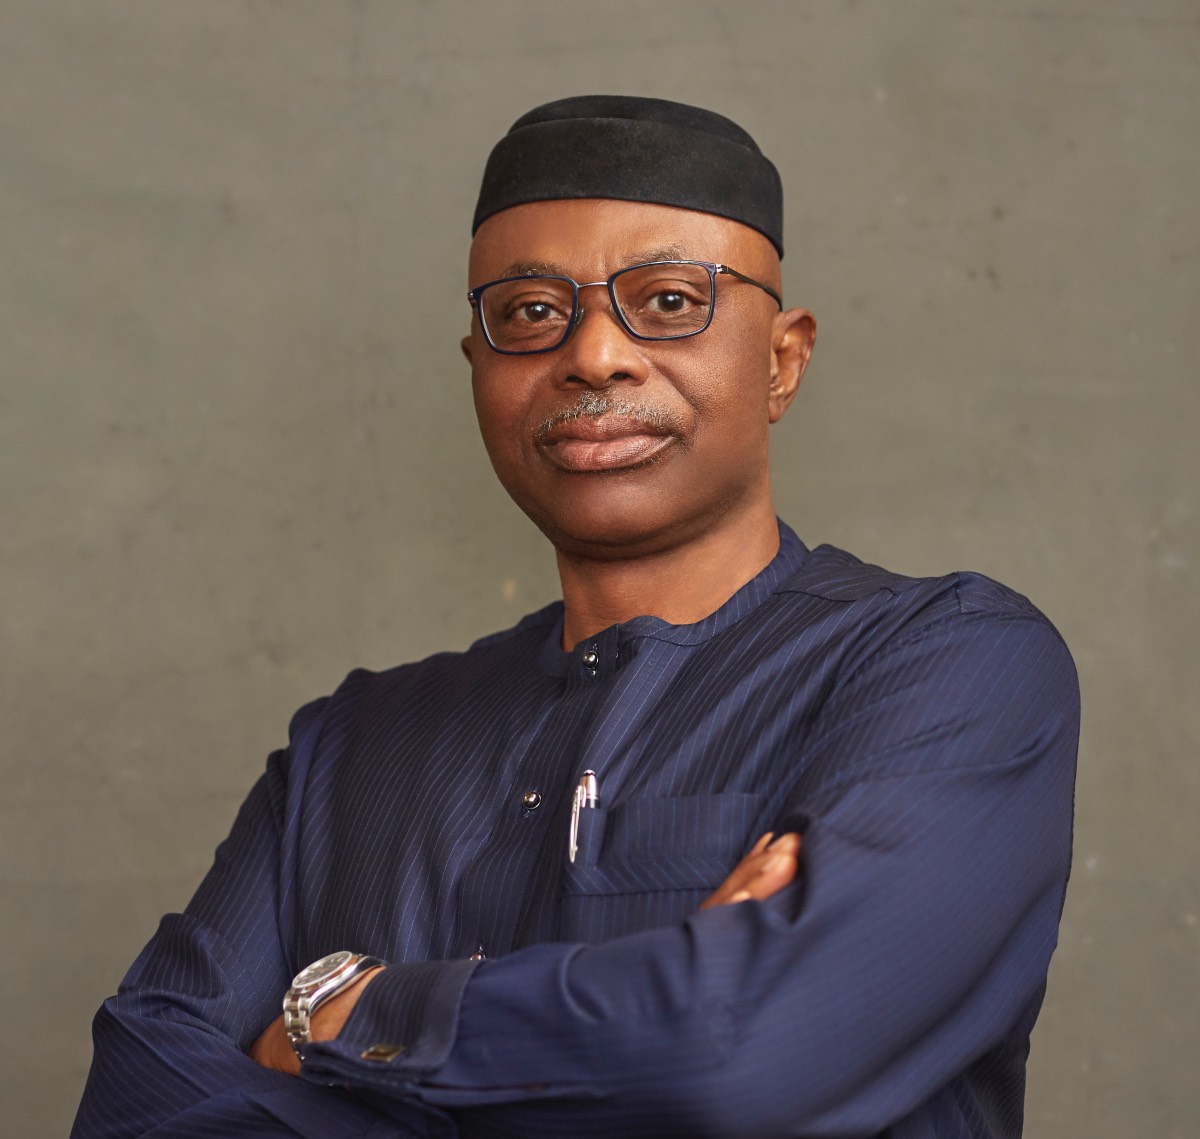 His Excellency, Dr. Olusegun Mimiko, former governor of Ondo State